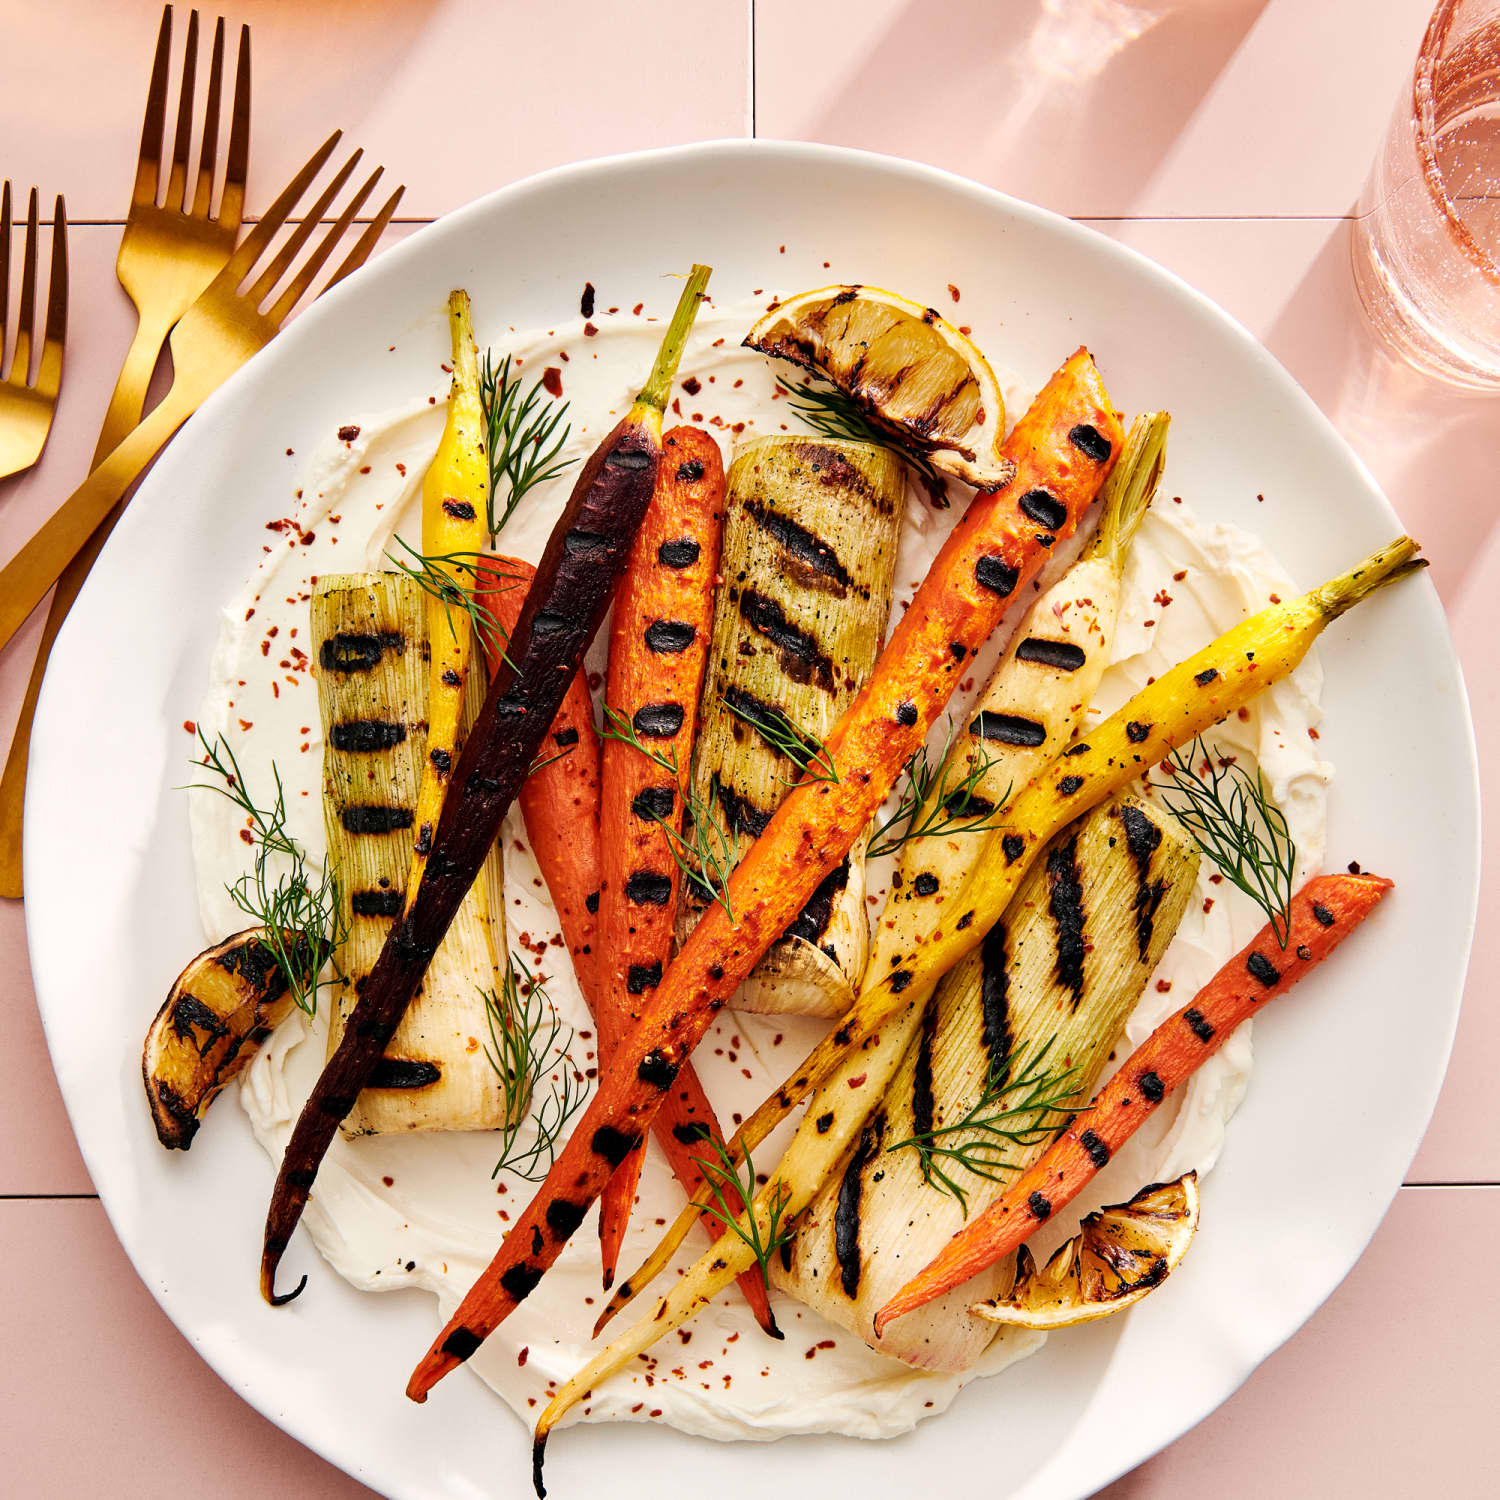 https://cdn.apartmenttherapy.info/image/upload/f_jpg,q_auto:eco,c_fill,g_auto,w_1500,ar_1:1/k%2FPhoto%2FRecipes%2F2022-08-grilled-carrots-and-leeks-with-labneh%2Fk-grilled-carrots-and-leeks-with-labneh